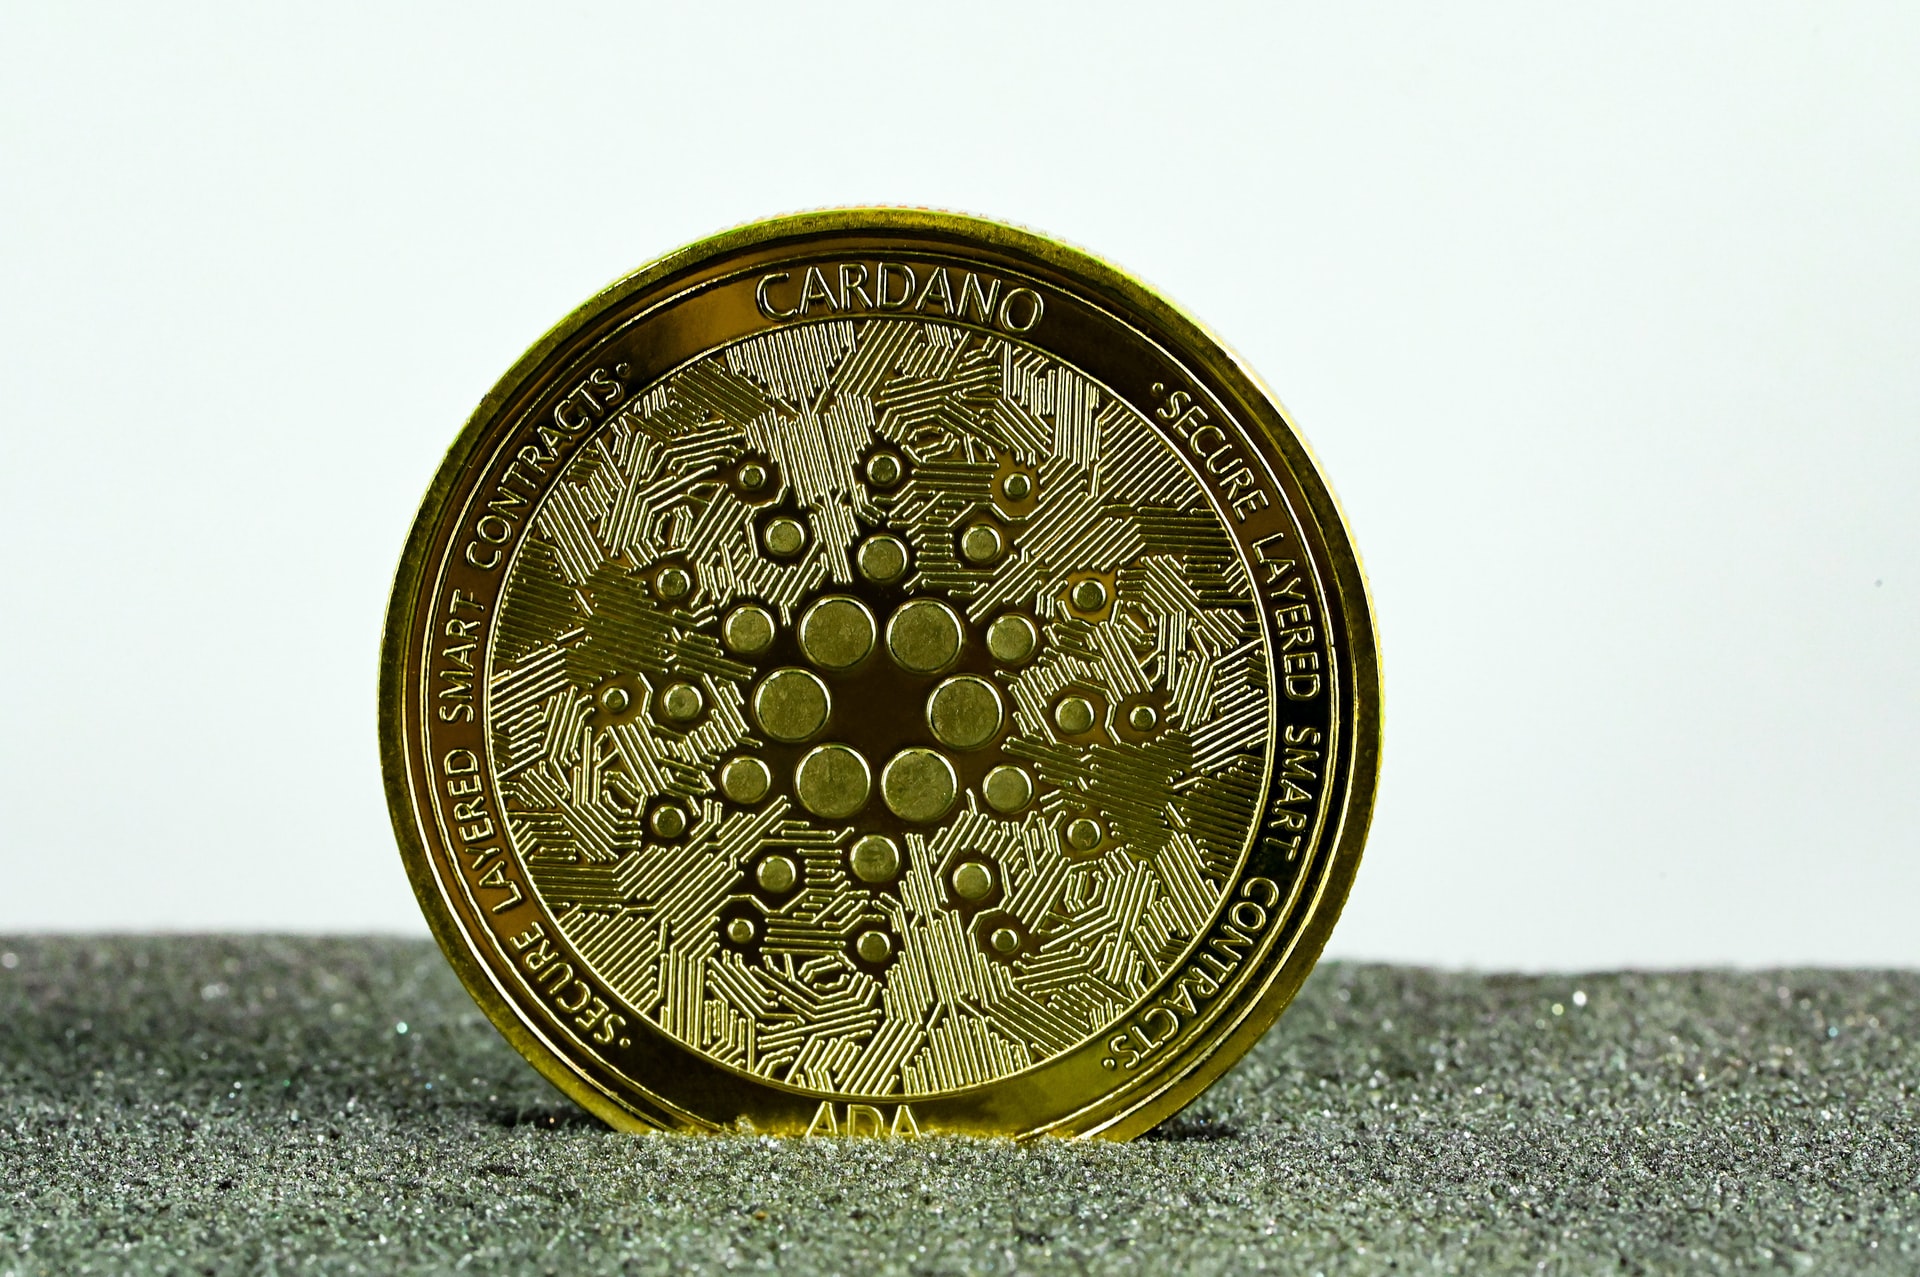 Cardano Pushes Out Final Node, Vasil Hard Fork On Schedule